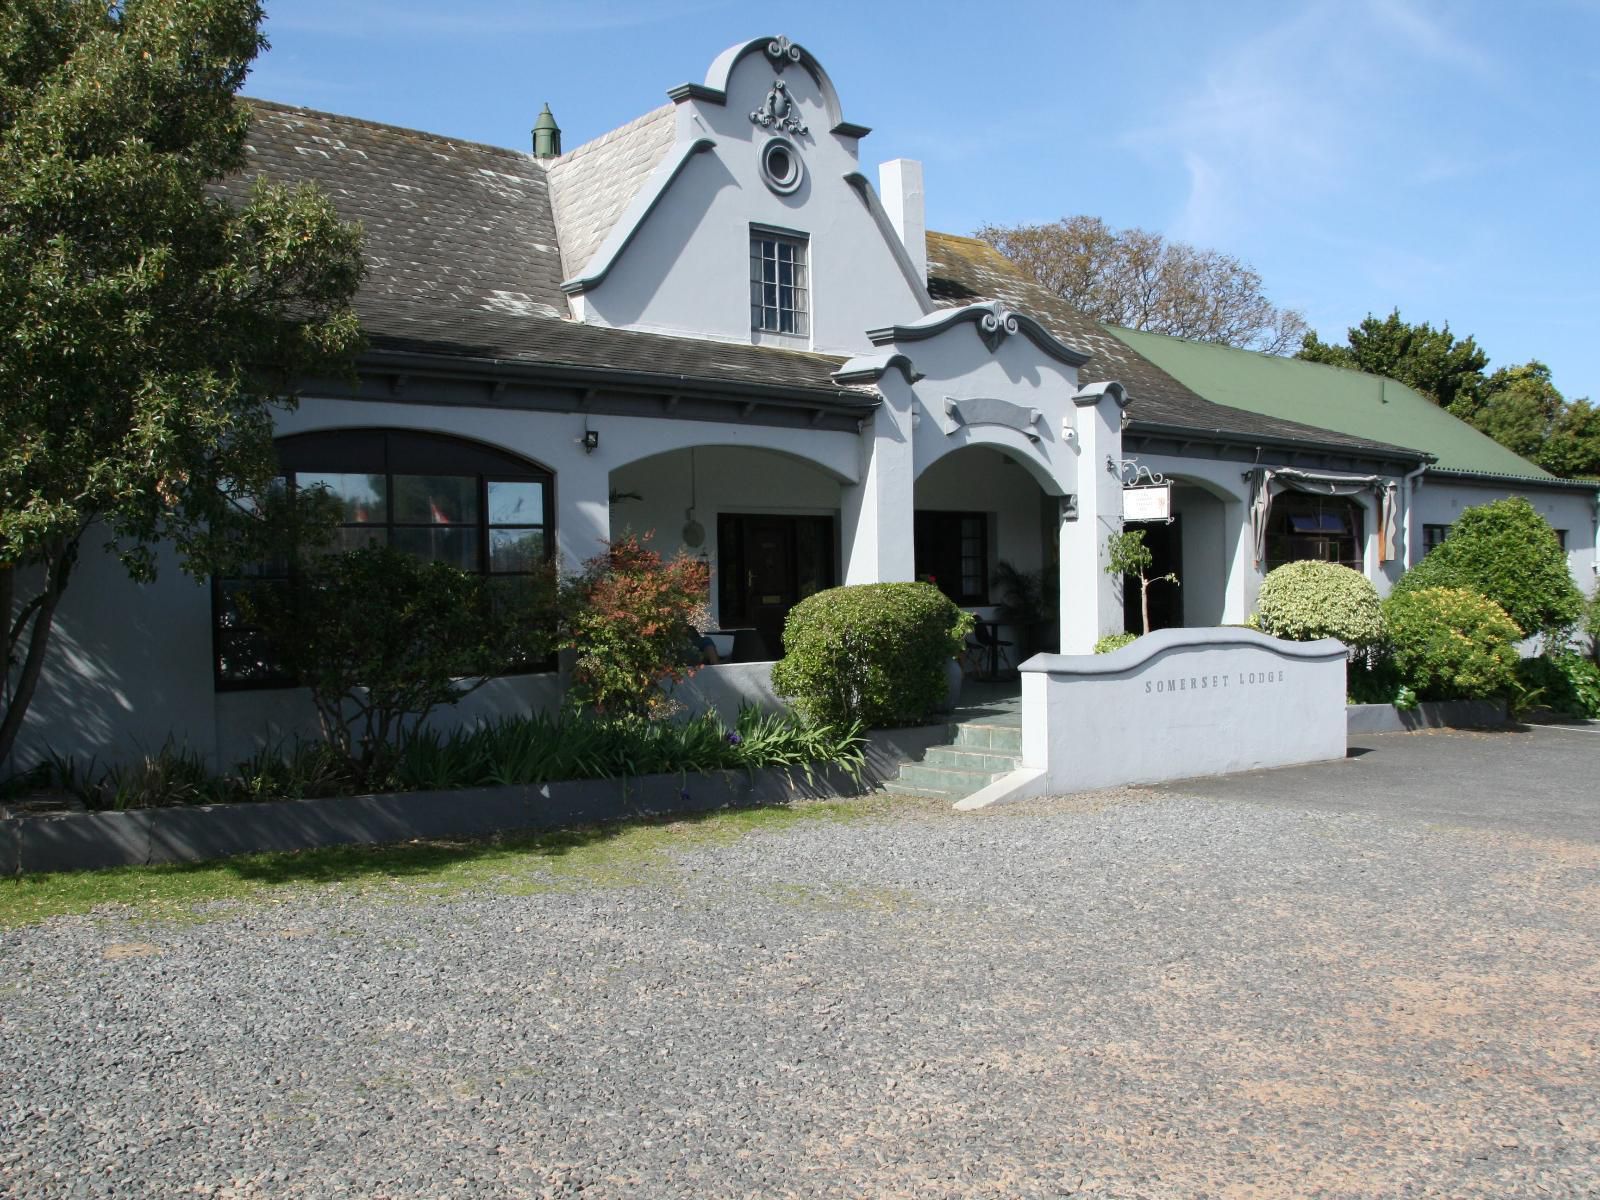 Somerset Lodge Somerset West Western Cape South Africa House, Building, Architecture